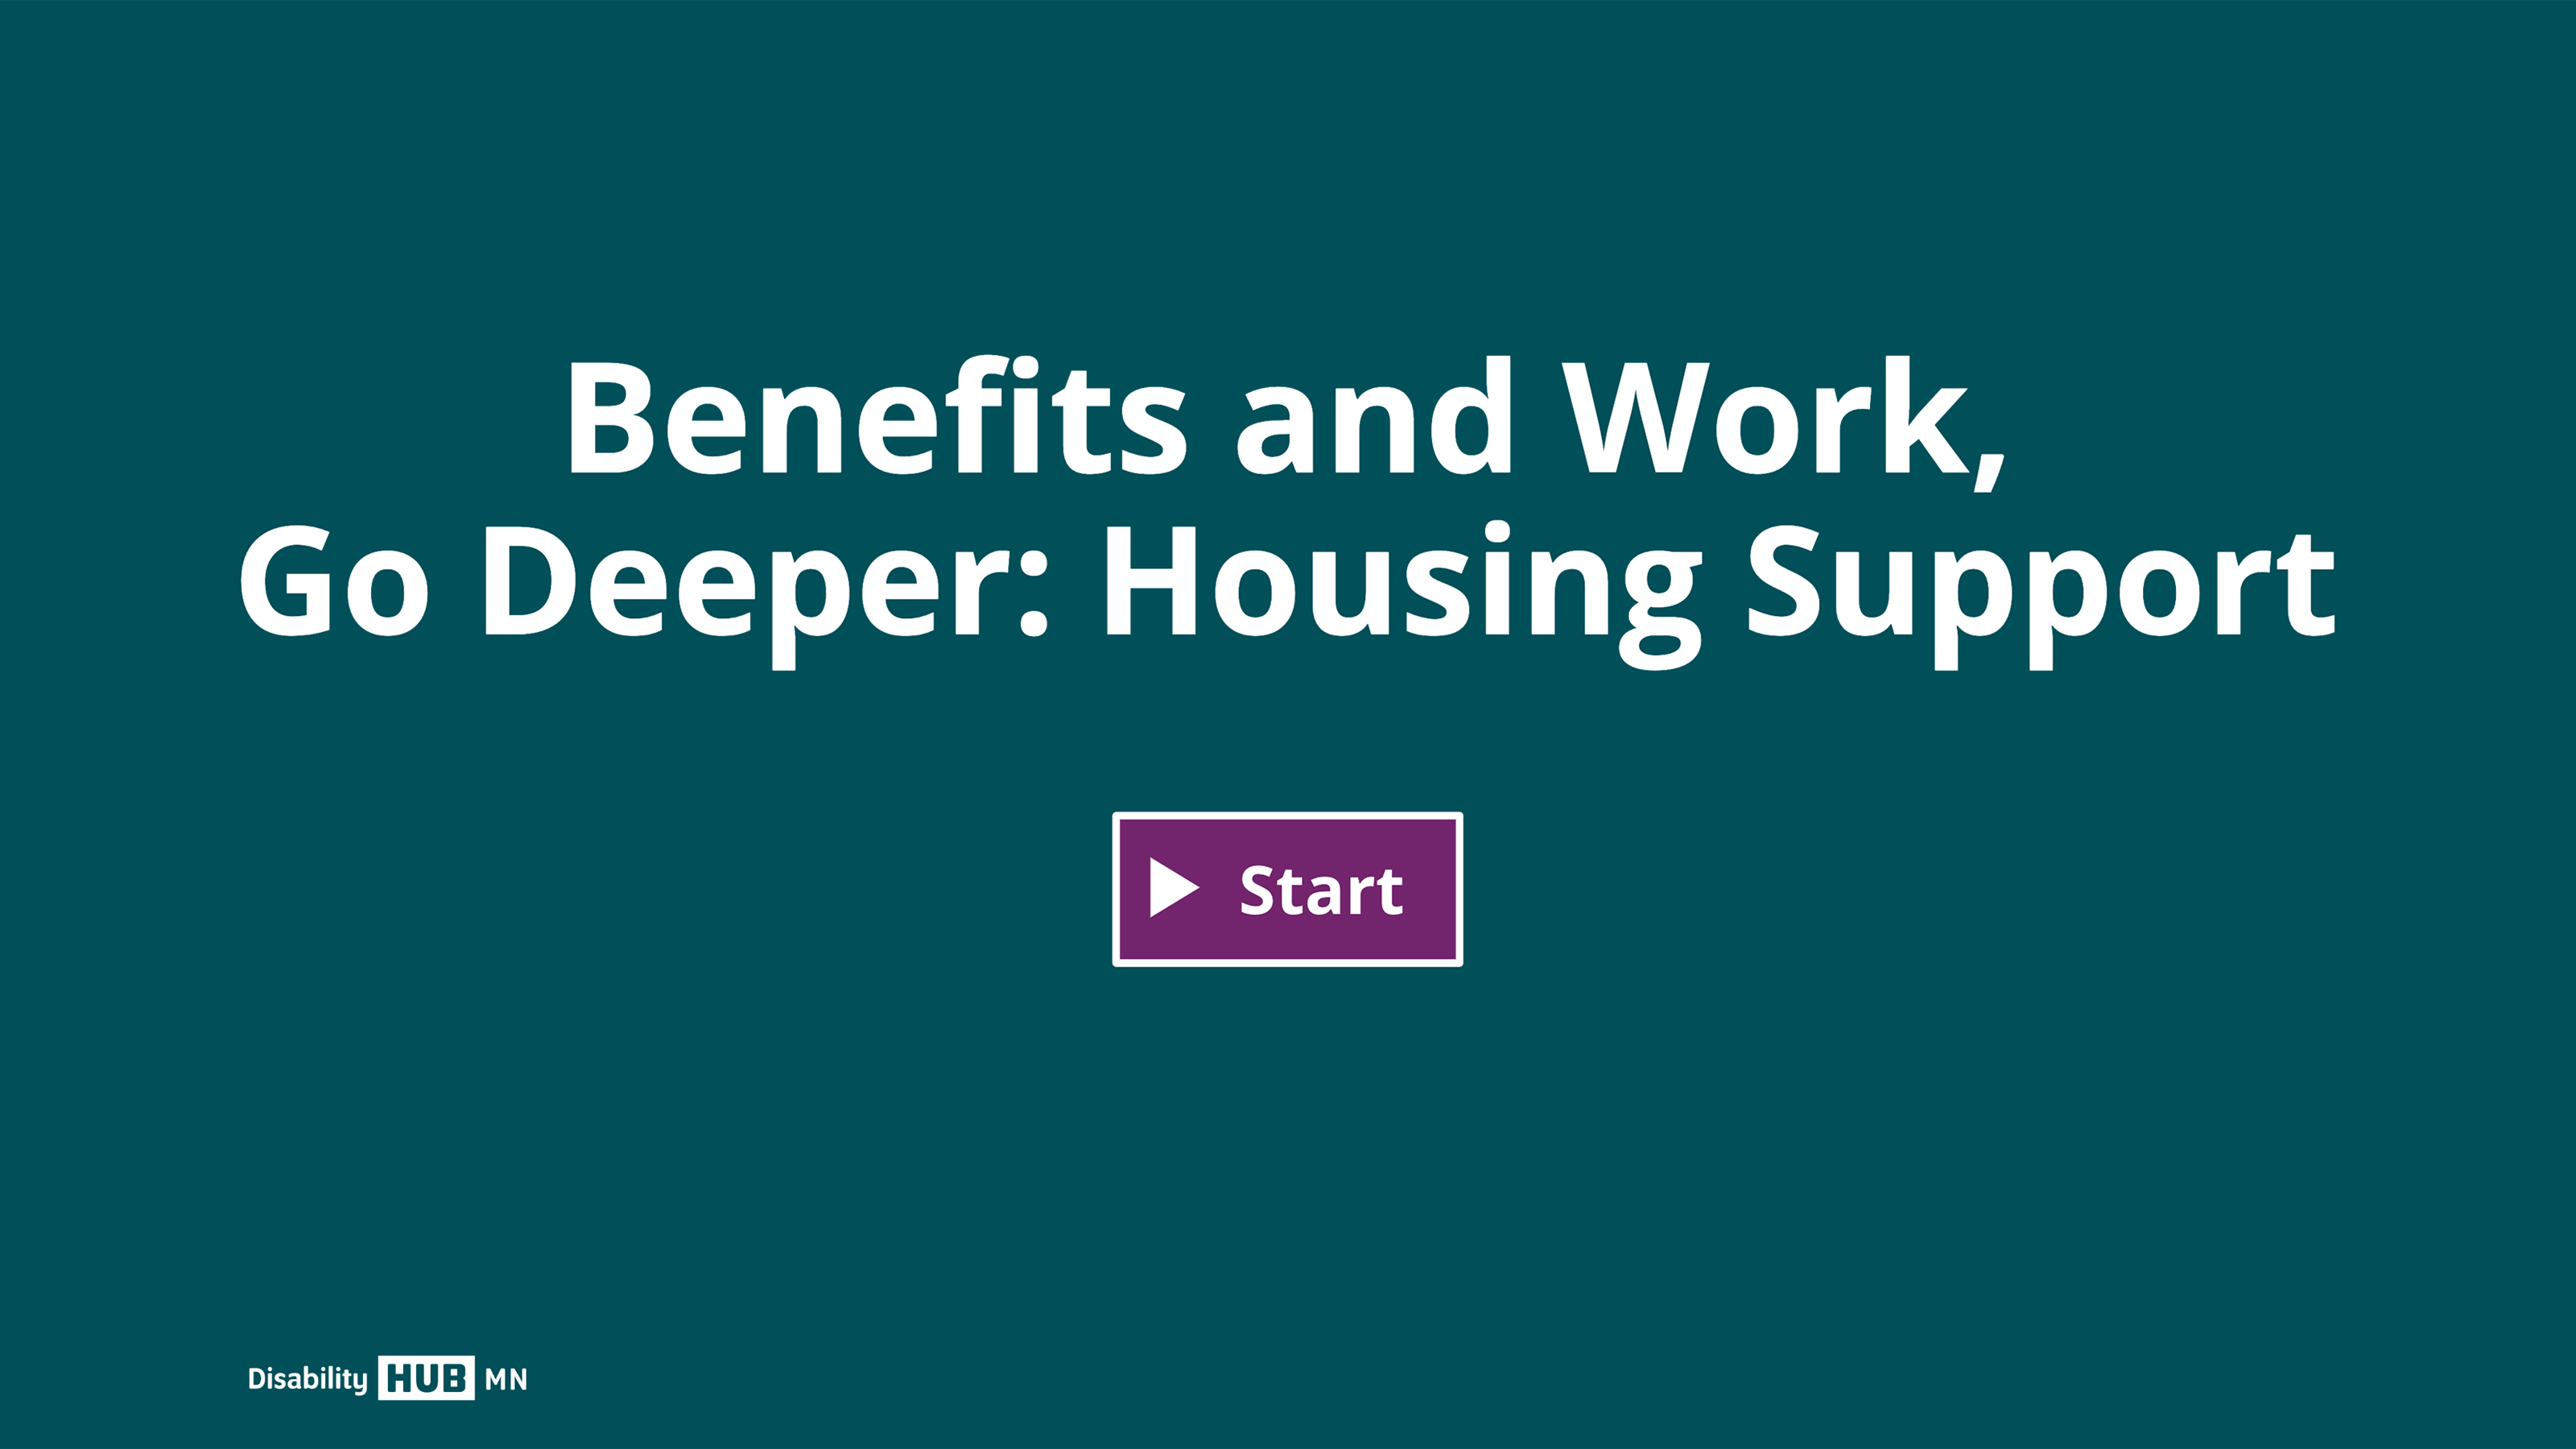 Click this image to begin the Benefits and Work, Go Deeper: Housing Support e-learning